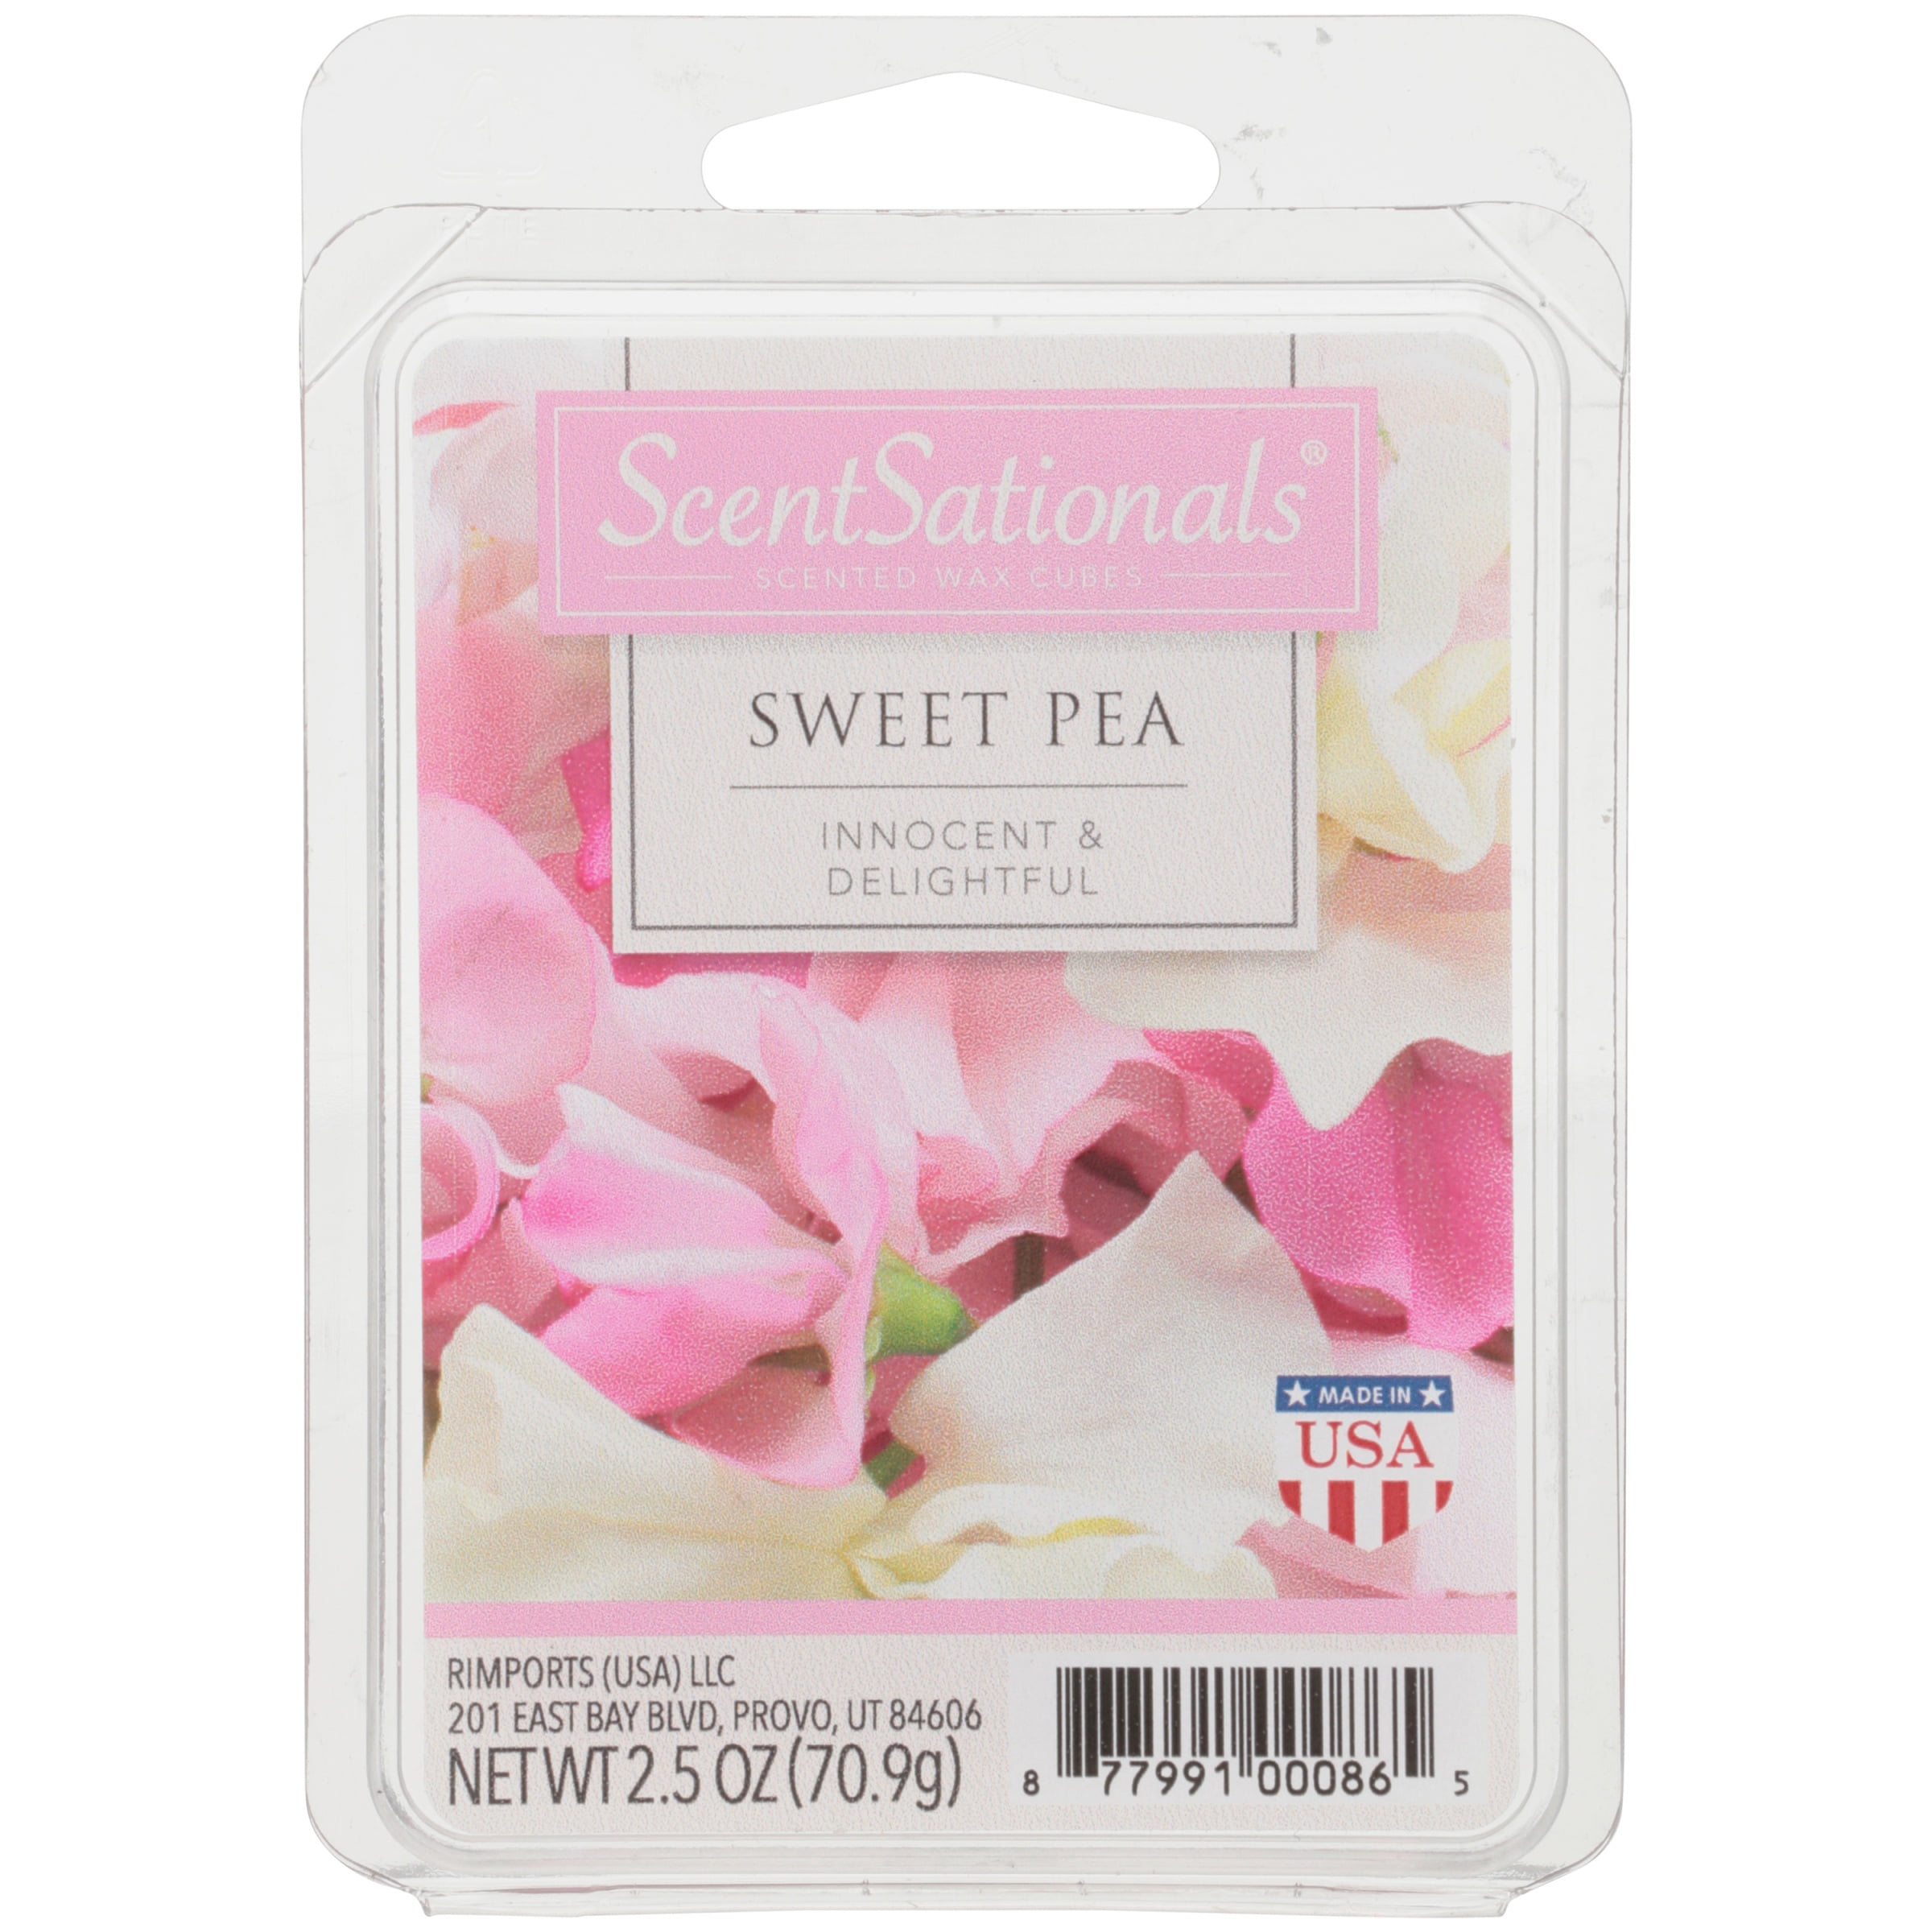 Sweet Pea Scented Wax Melts, ScentSationals, 2.5 oz (1 Pack)